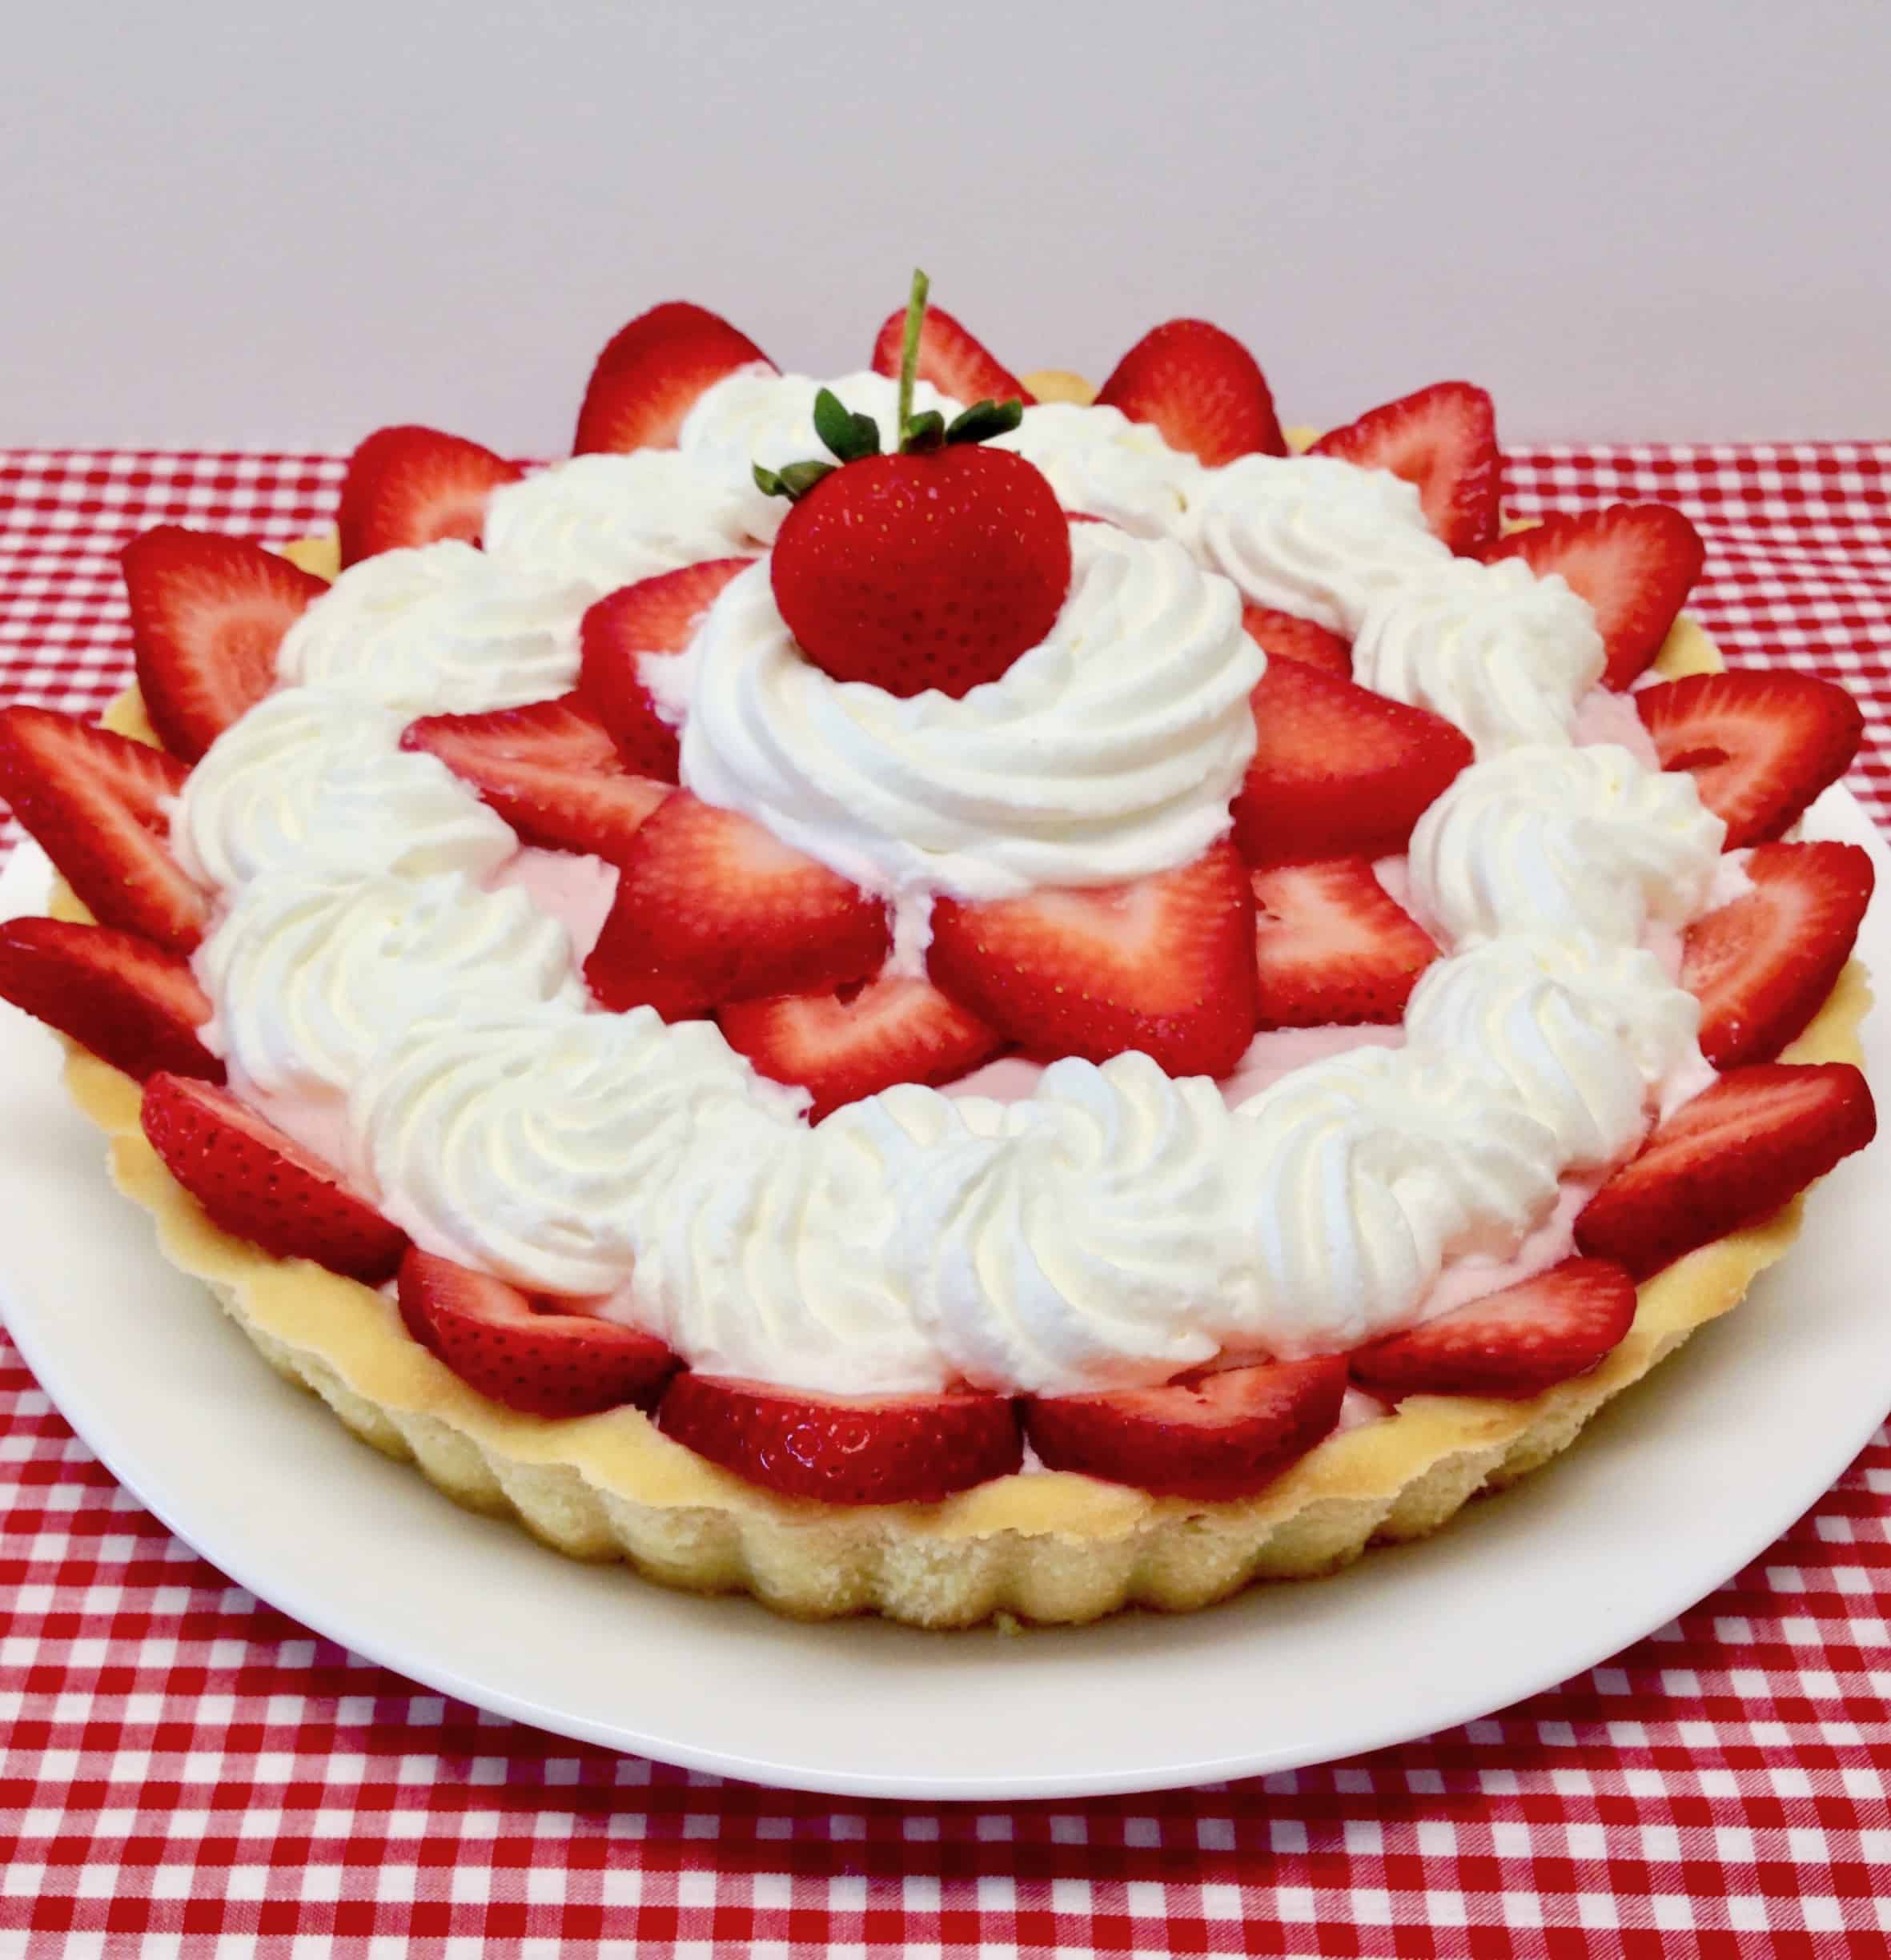 strawberry cream tart decorated with whip cream and fresh strawberries on top